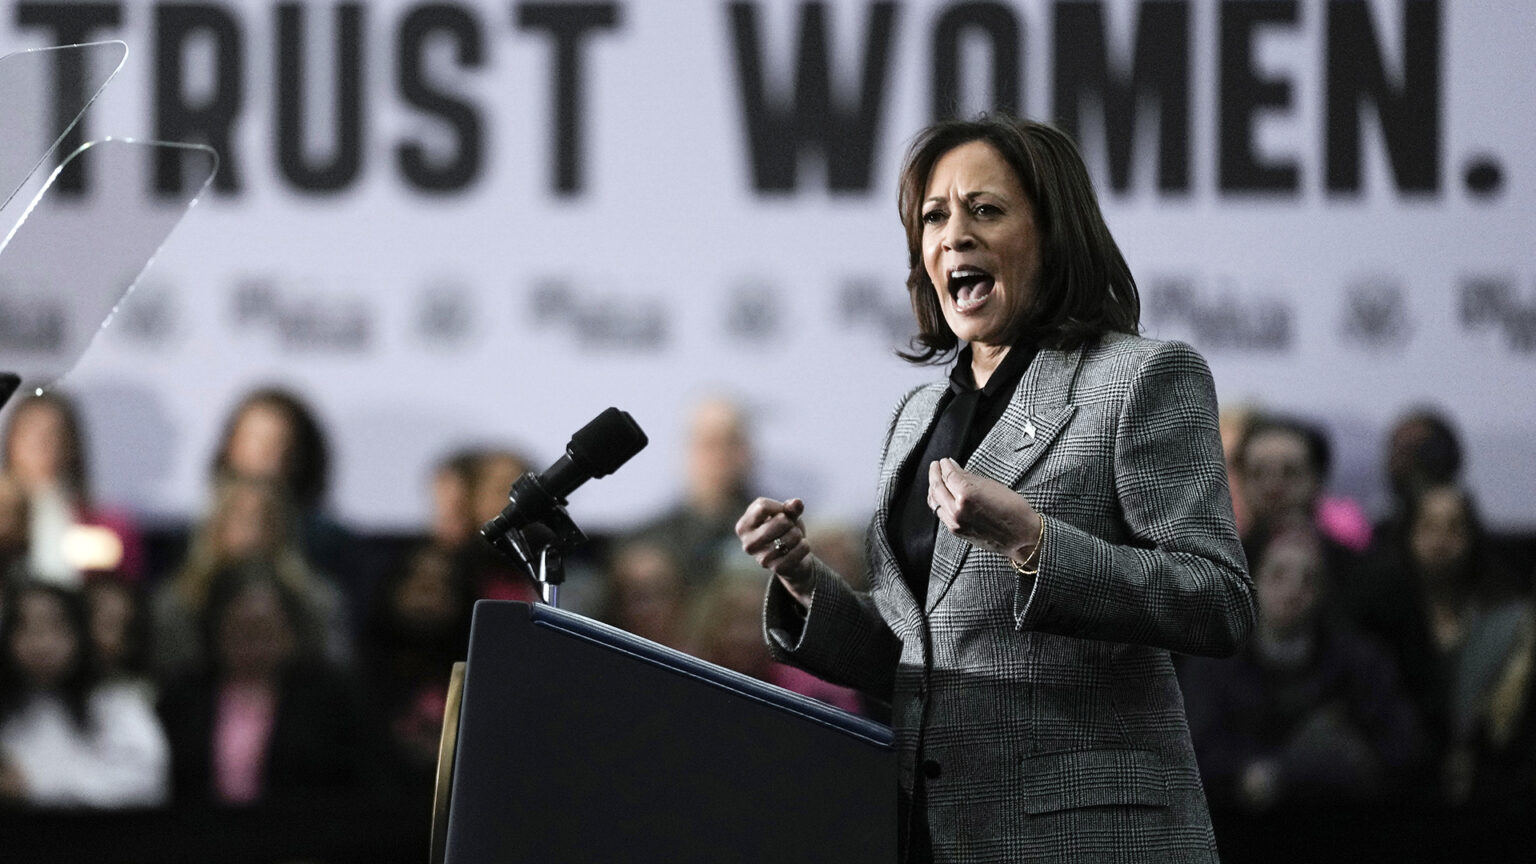 Kamala Harris speaks and gestures with both hands while standing behind a podium with two mounted microphones and facing two teleprompter mirrors, with out-of-focus people standing in the background beneath a sign reading Trust Women.